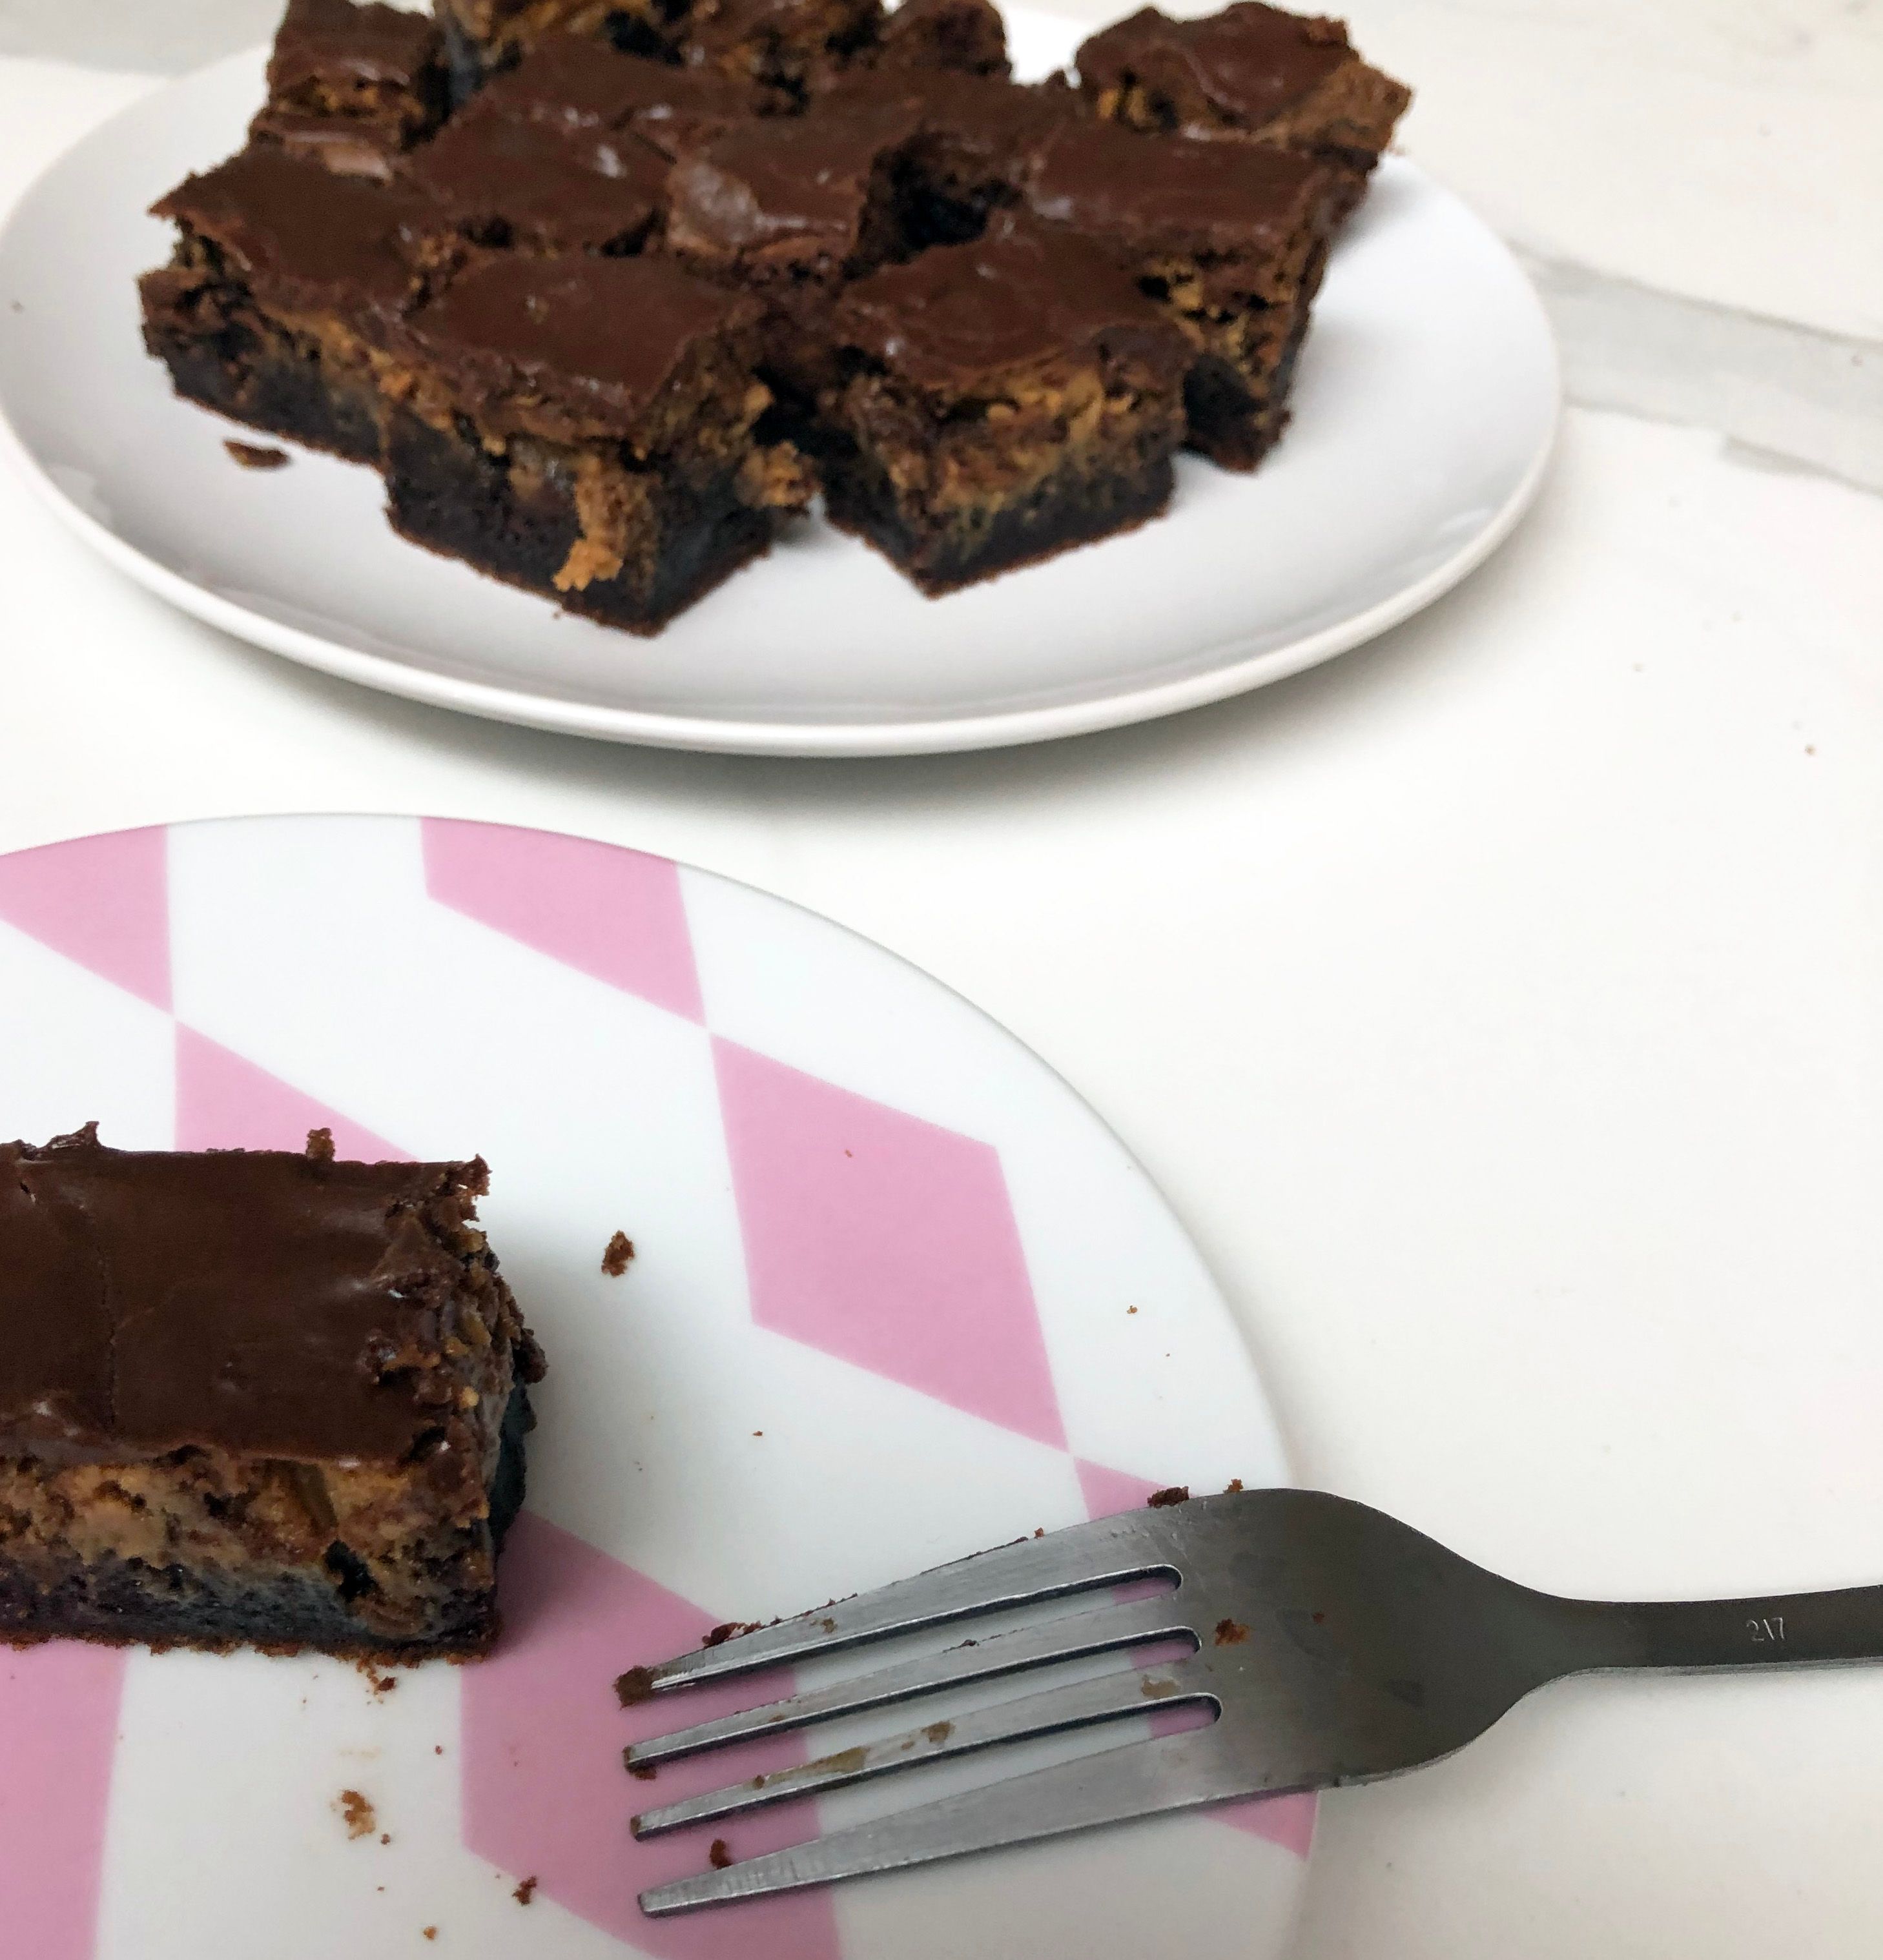 completed chocolate peanut butter fetish brownies on a plate